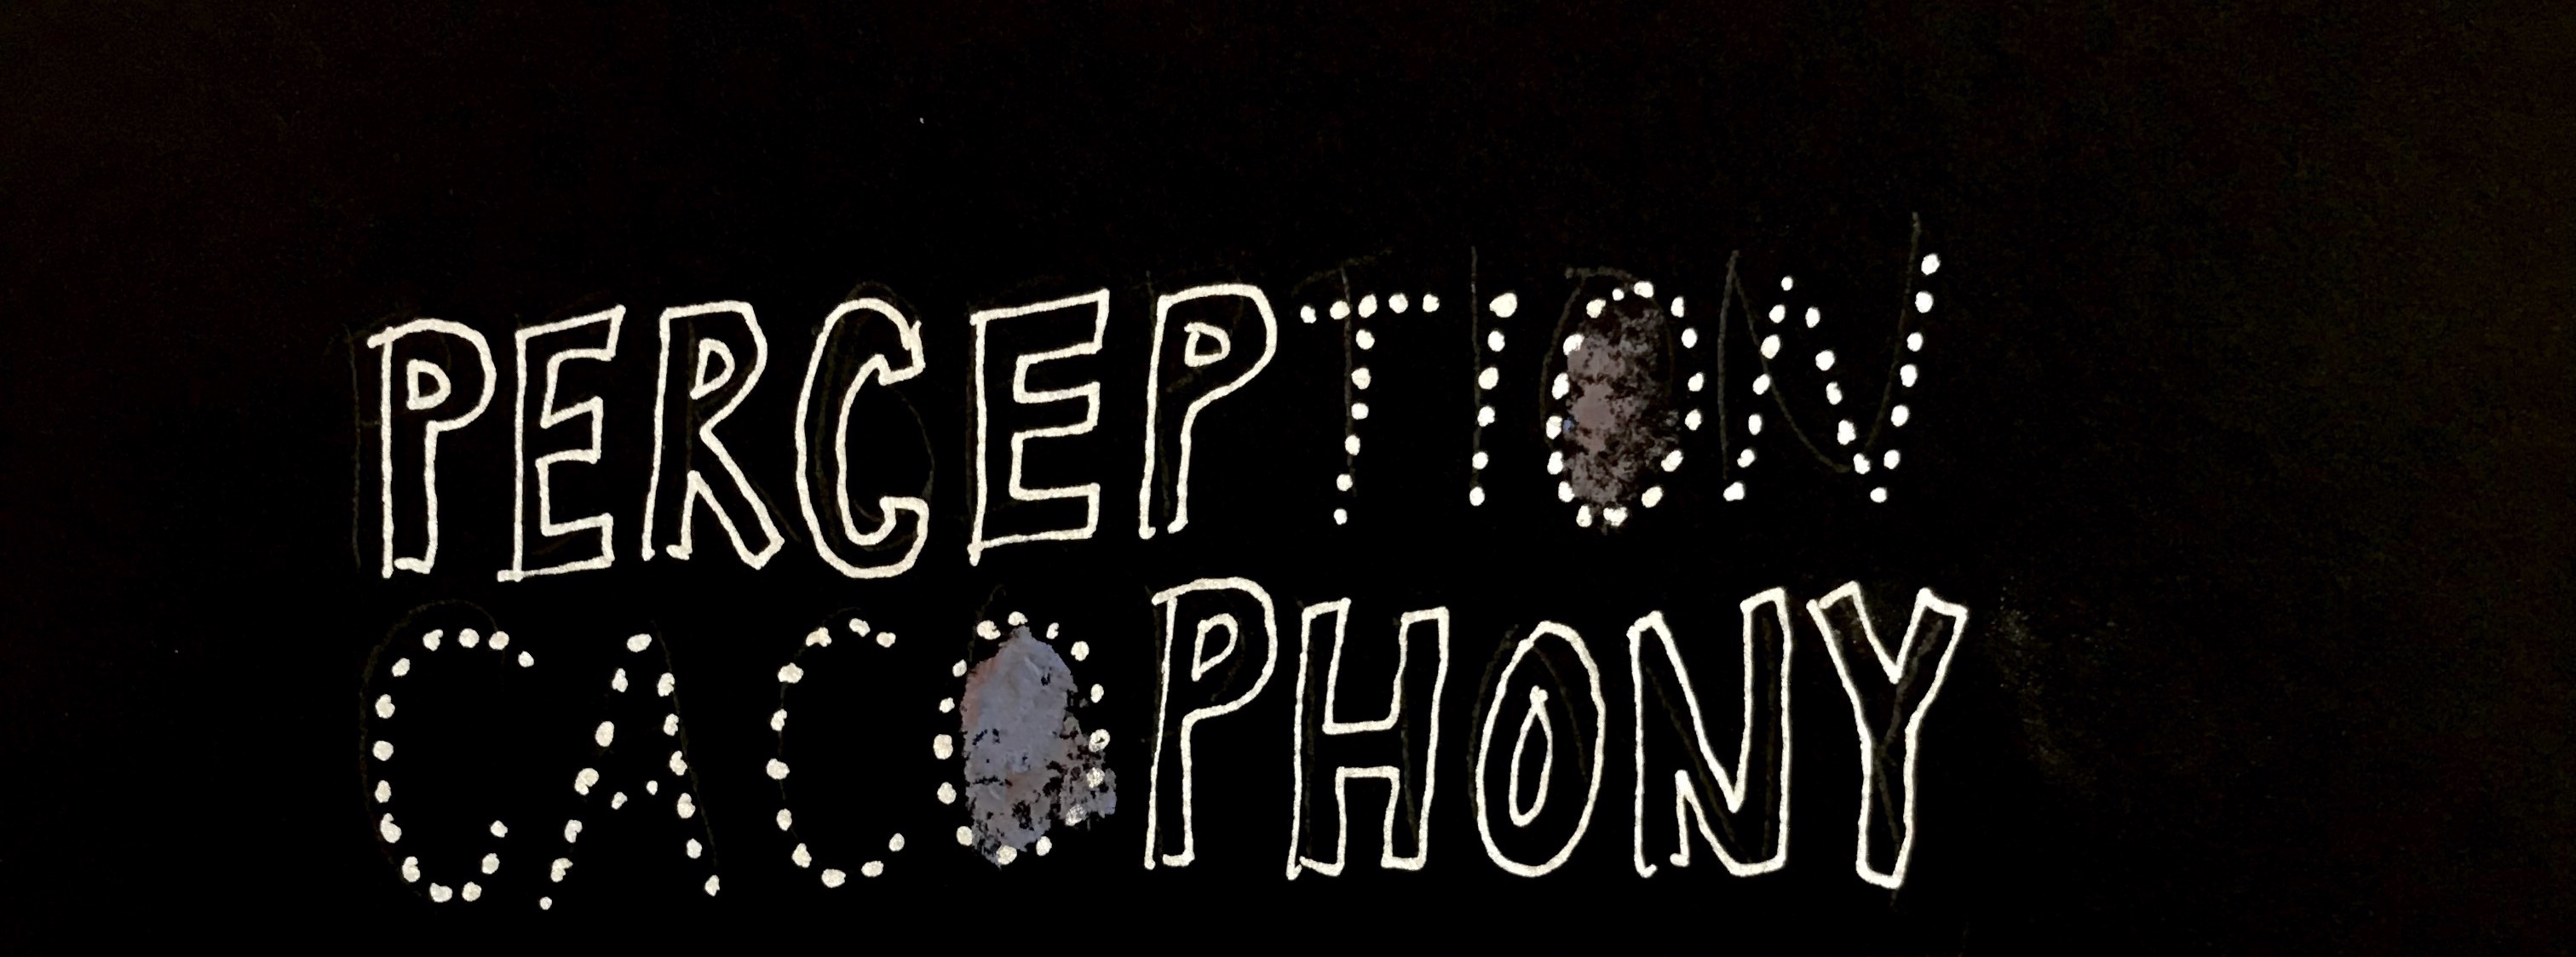 perception cacophony (hades & persephone) banner go back to homepage